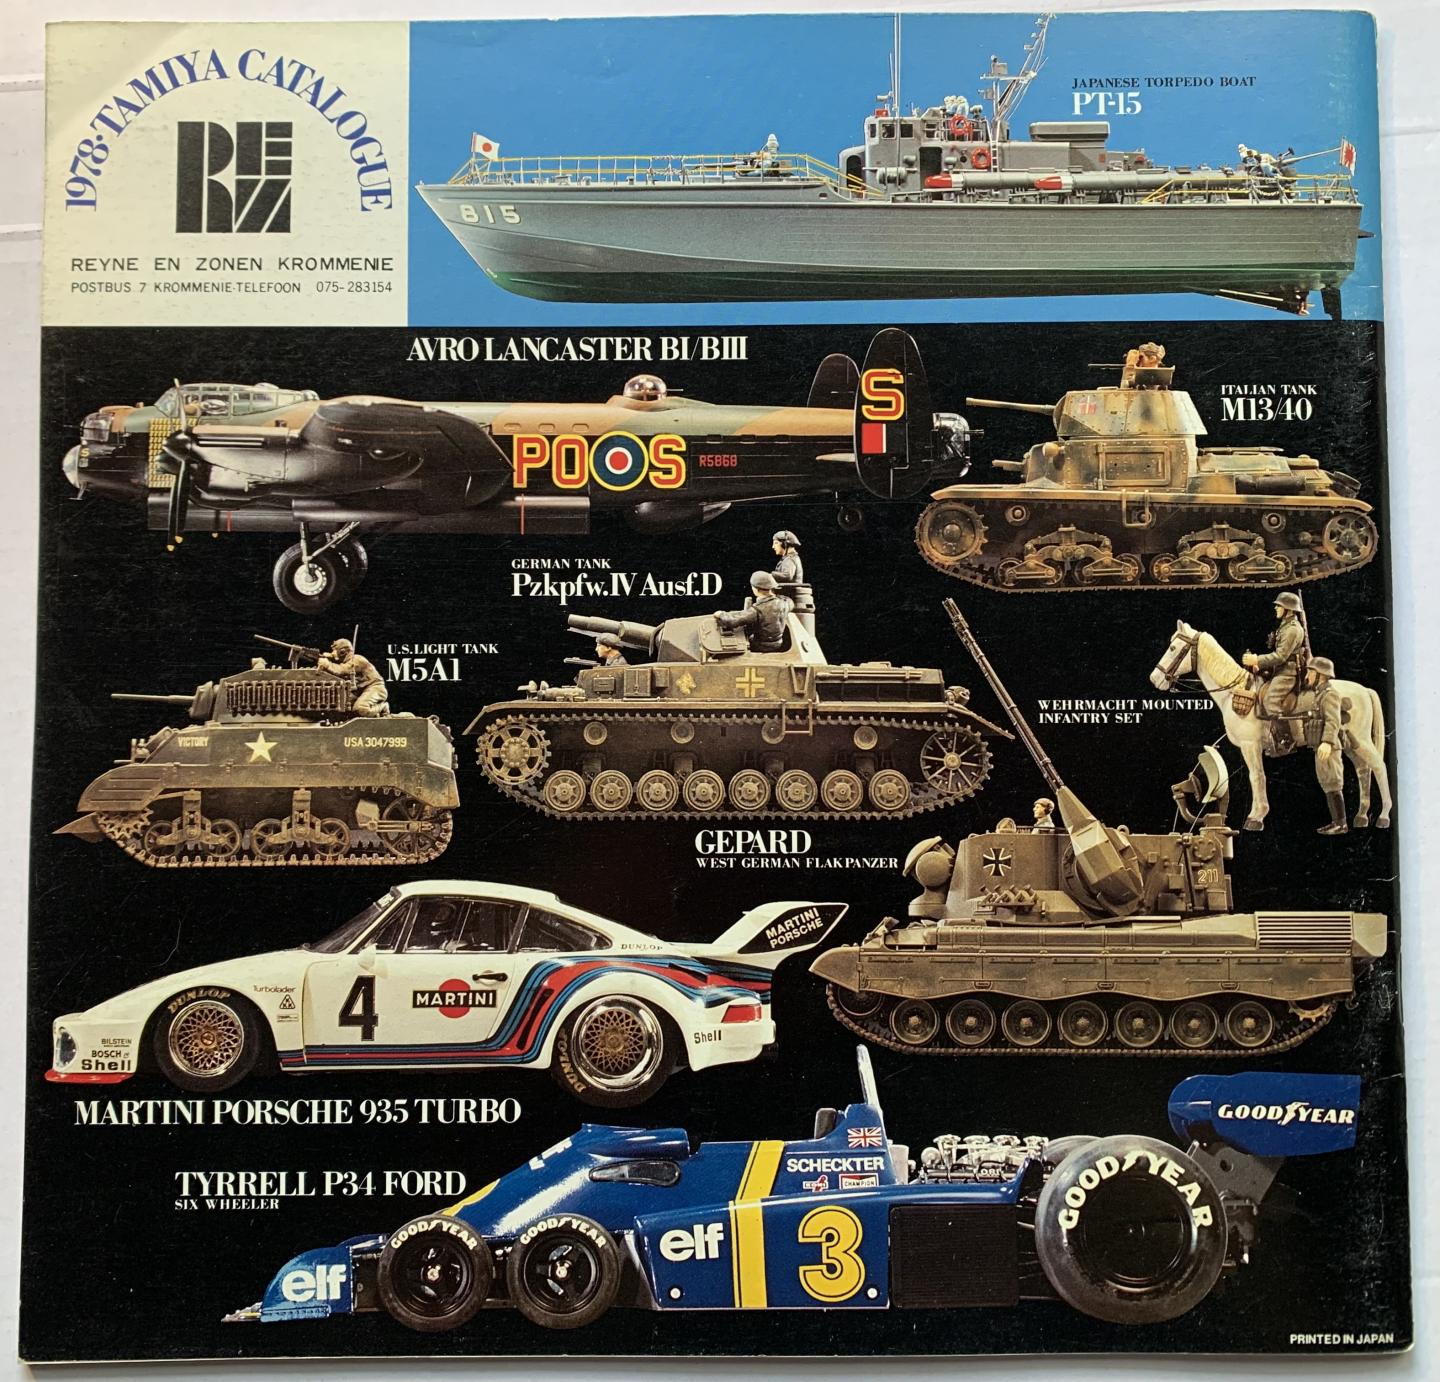 N.N. - 1978. Tamiya Catalogue. Showcase Collection precise scale model kits; armour, aircraft, motorcycles, ships, auto racing classics.